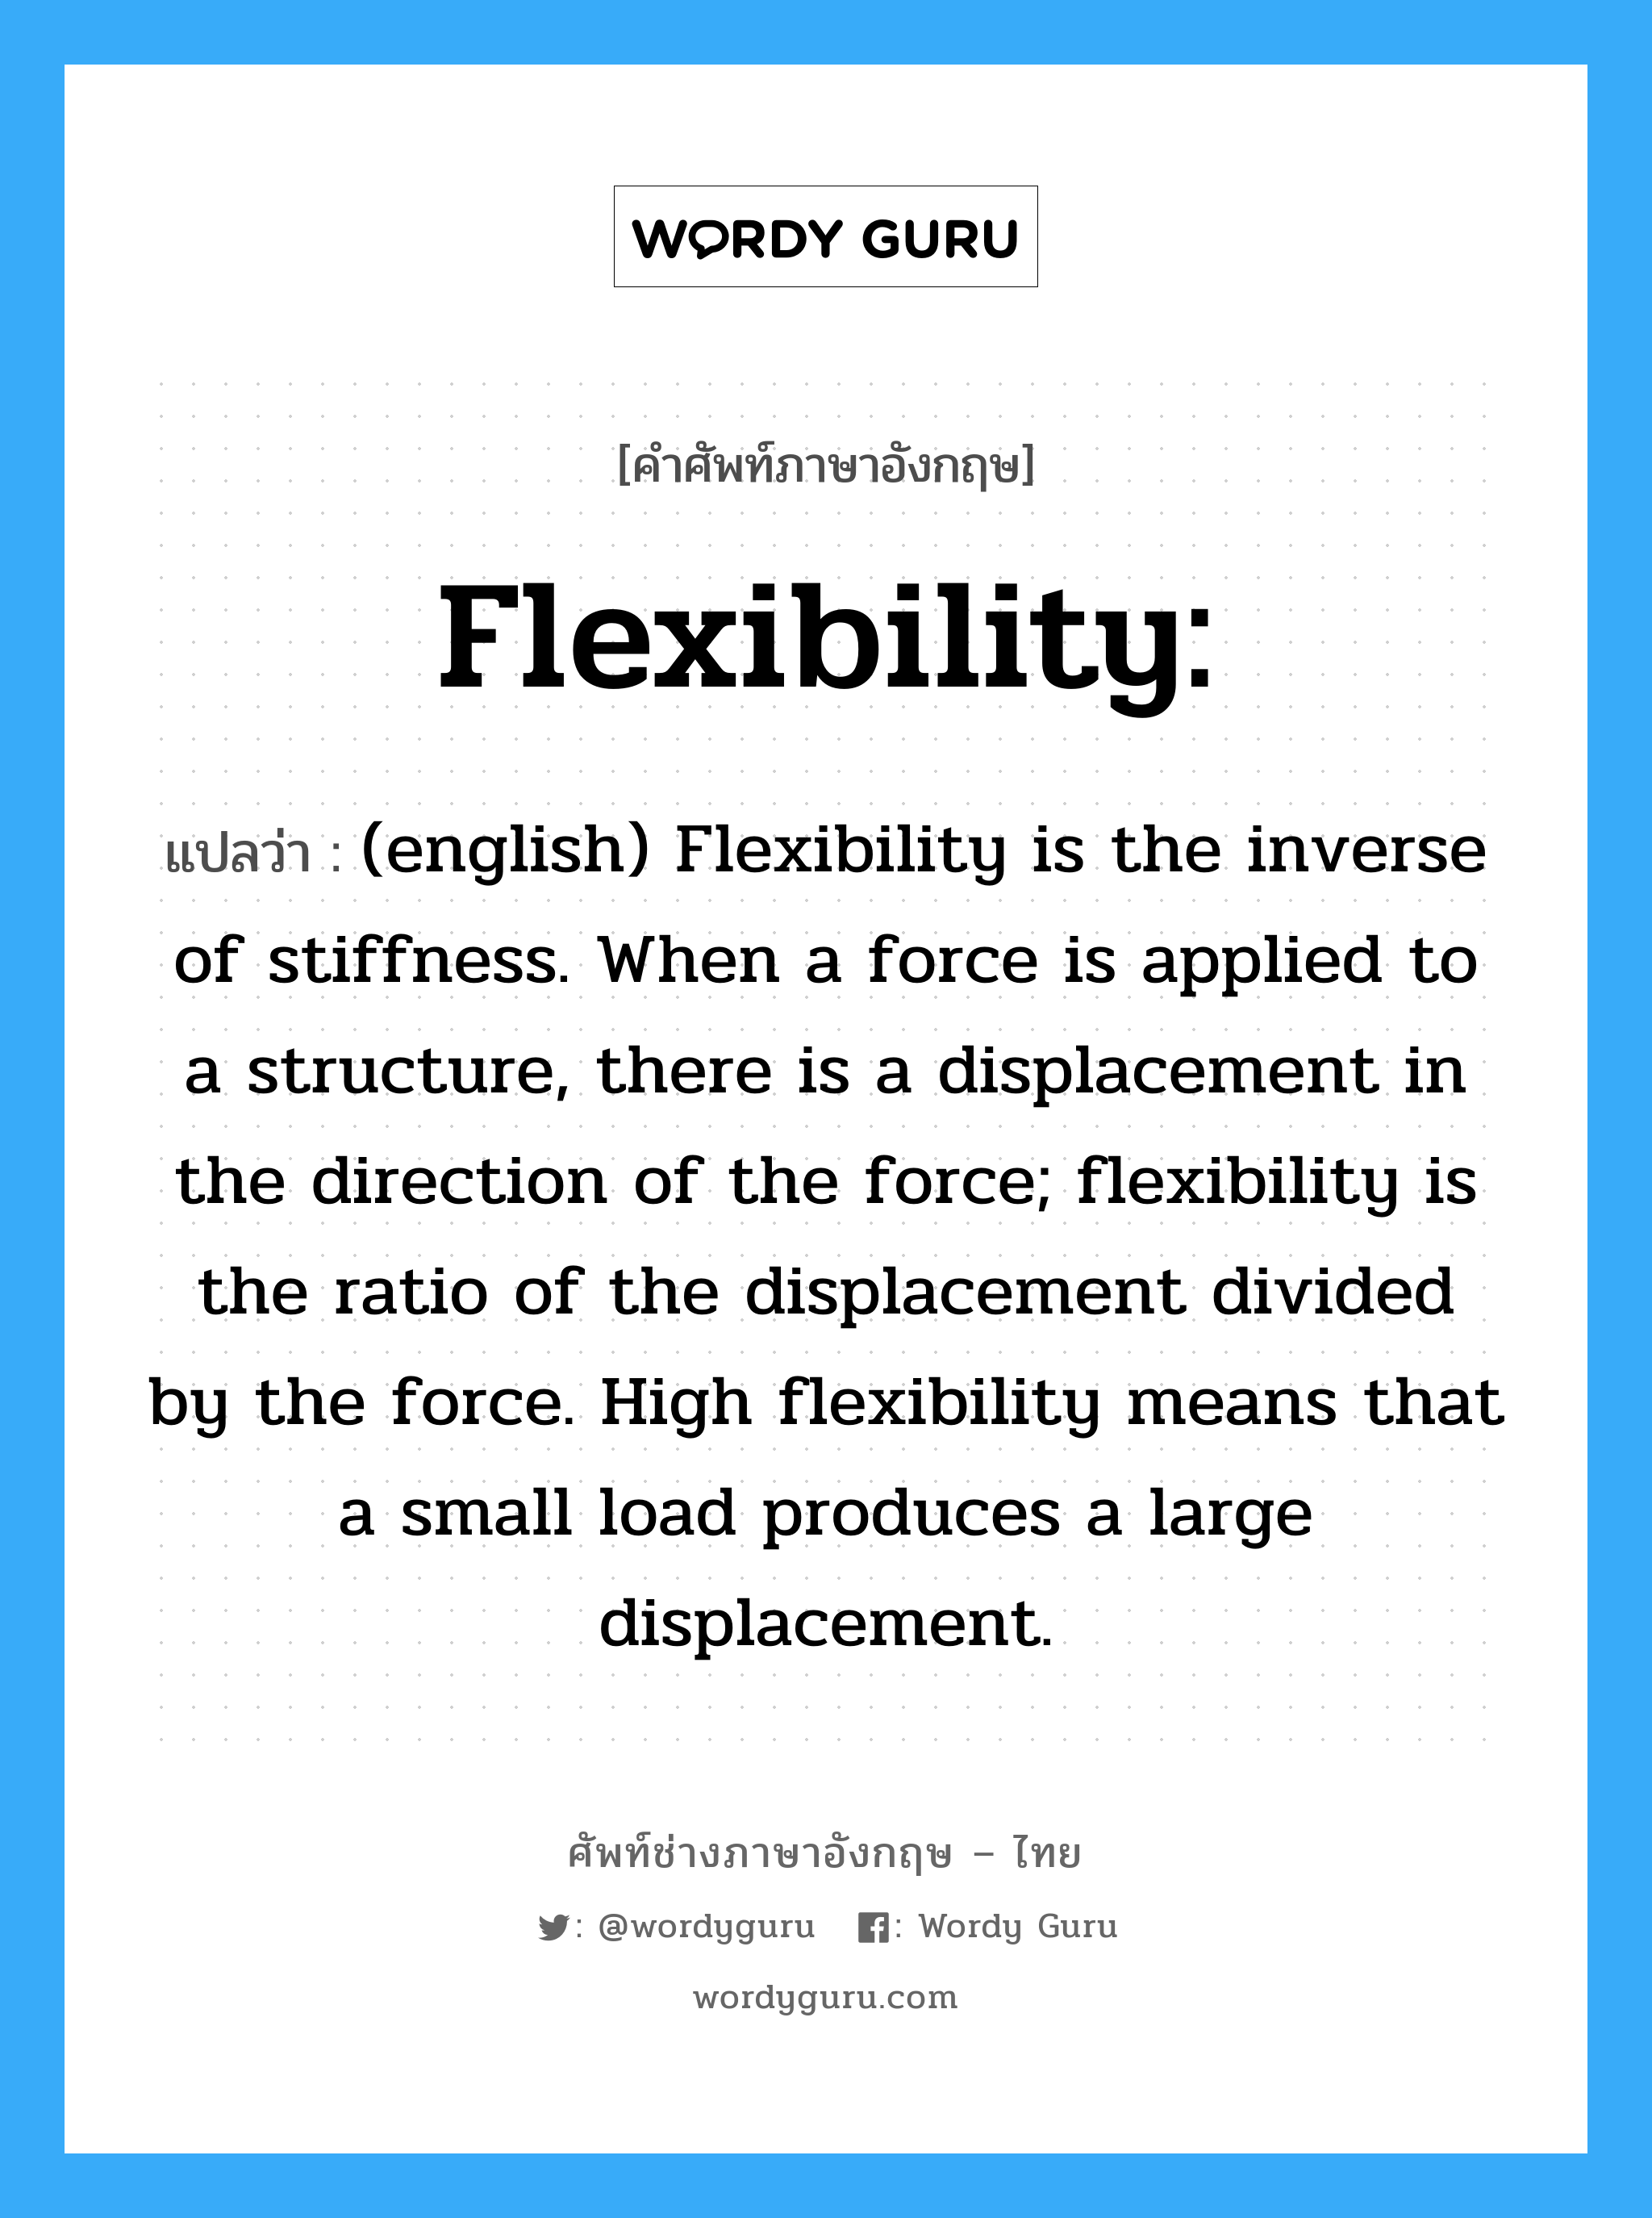 Flexibility: แปลว่า?, คำศัพท์ช่างภาษาอังกฤษ - ไทย Flexibility: คำศัพท์ภาษาอังกฤษ Flexibility: แปลว่า (english) Flexibility is the inverse of stiffness. When a force is applied to a structure, there is a displacement in the direction of the force; flexibility is the ratio of the displacement divided by the force. High flexibility means that a small load produces a large displacement.